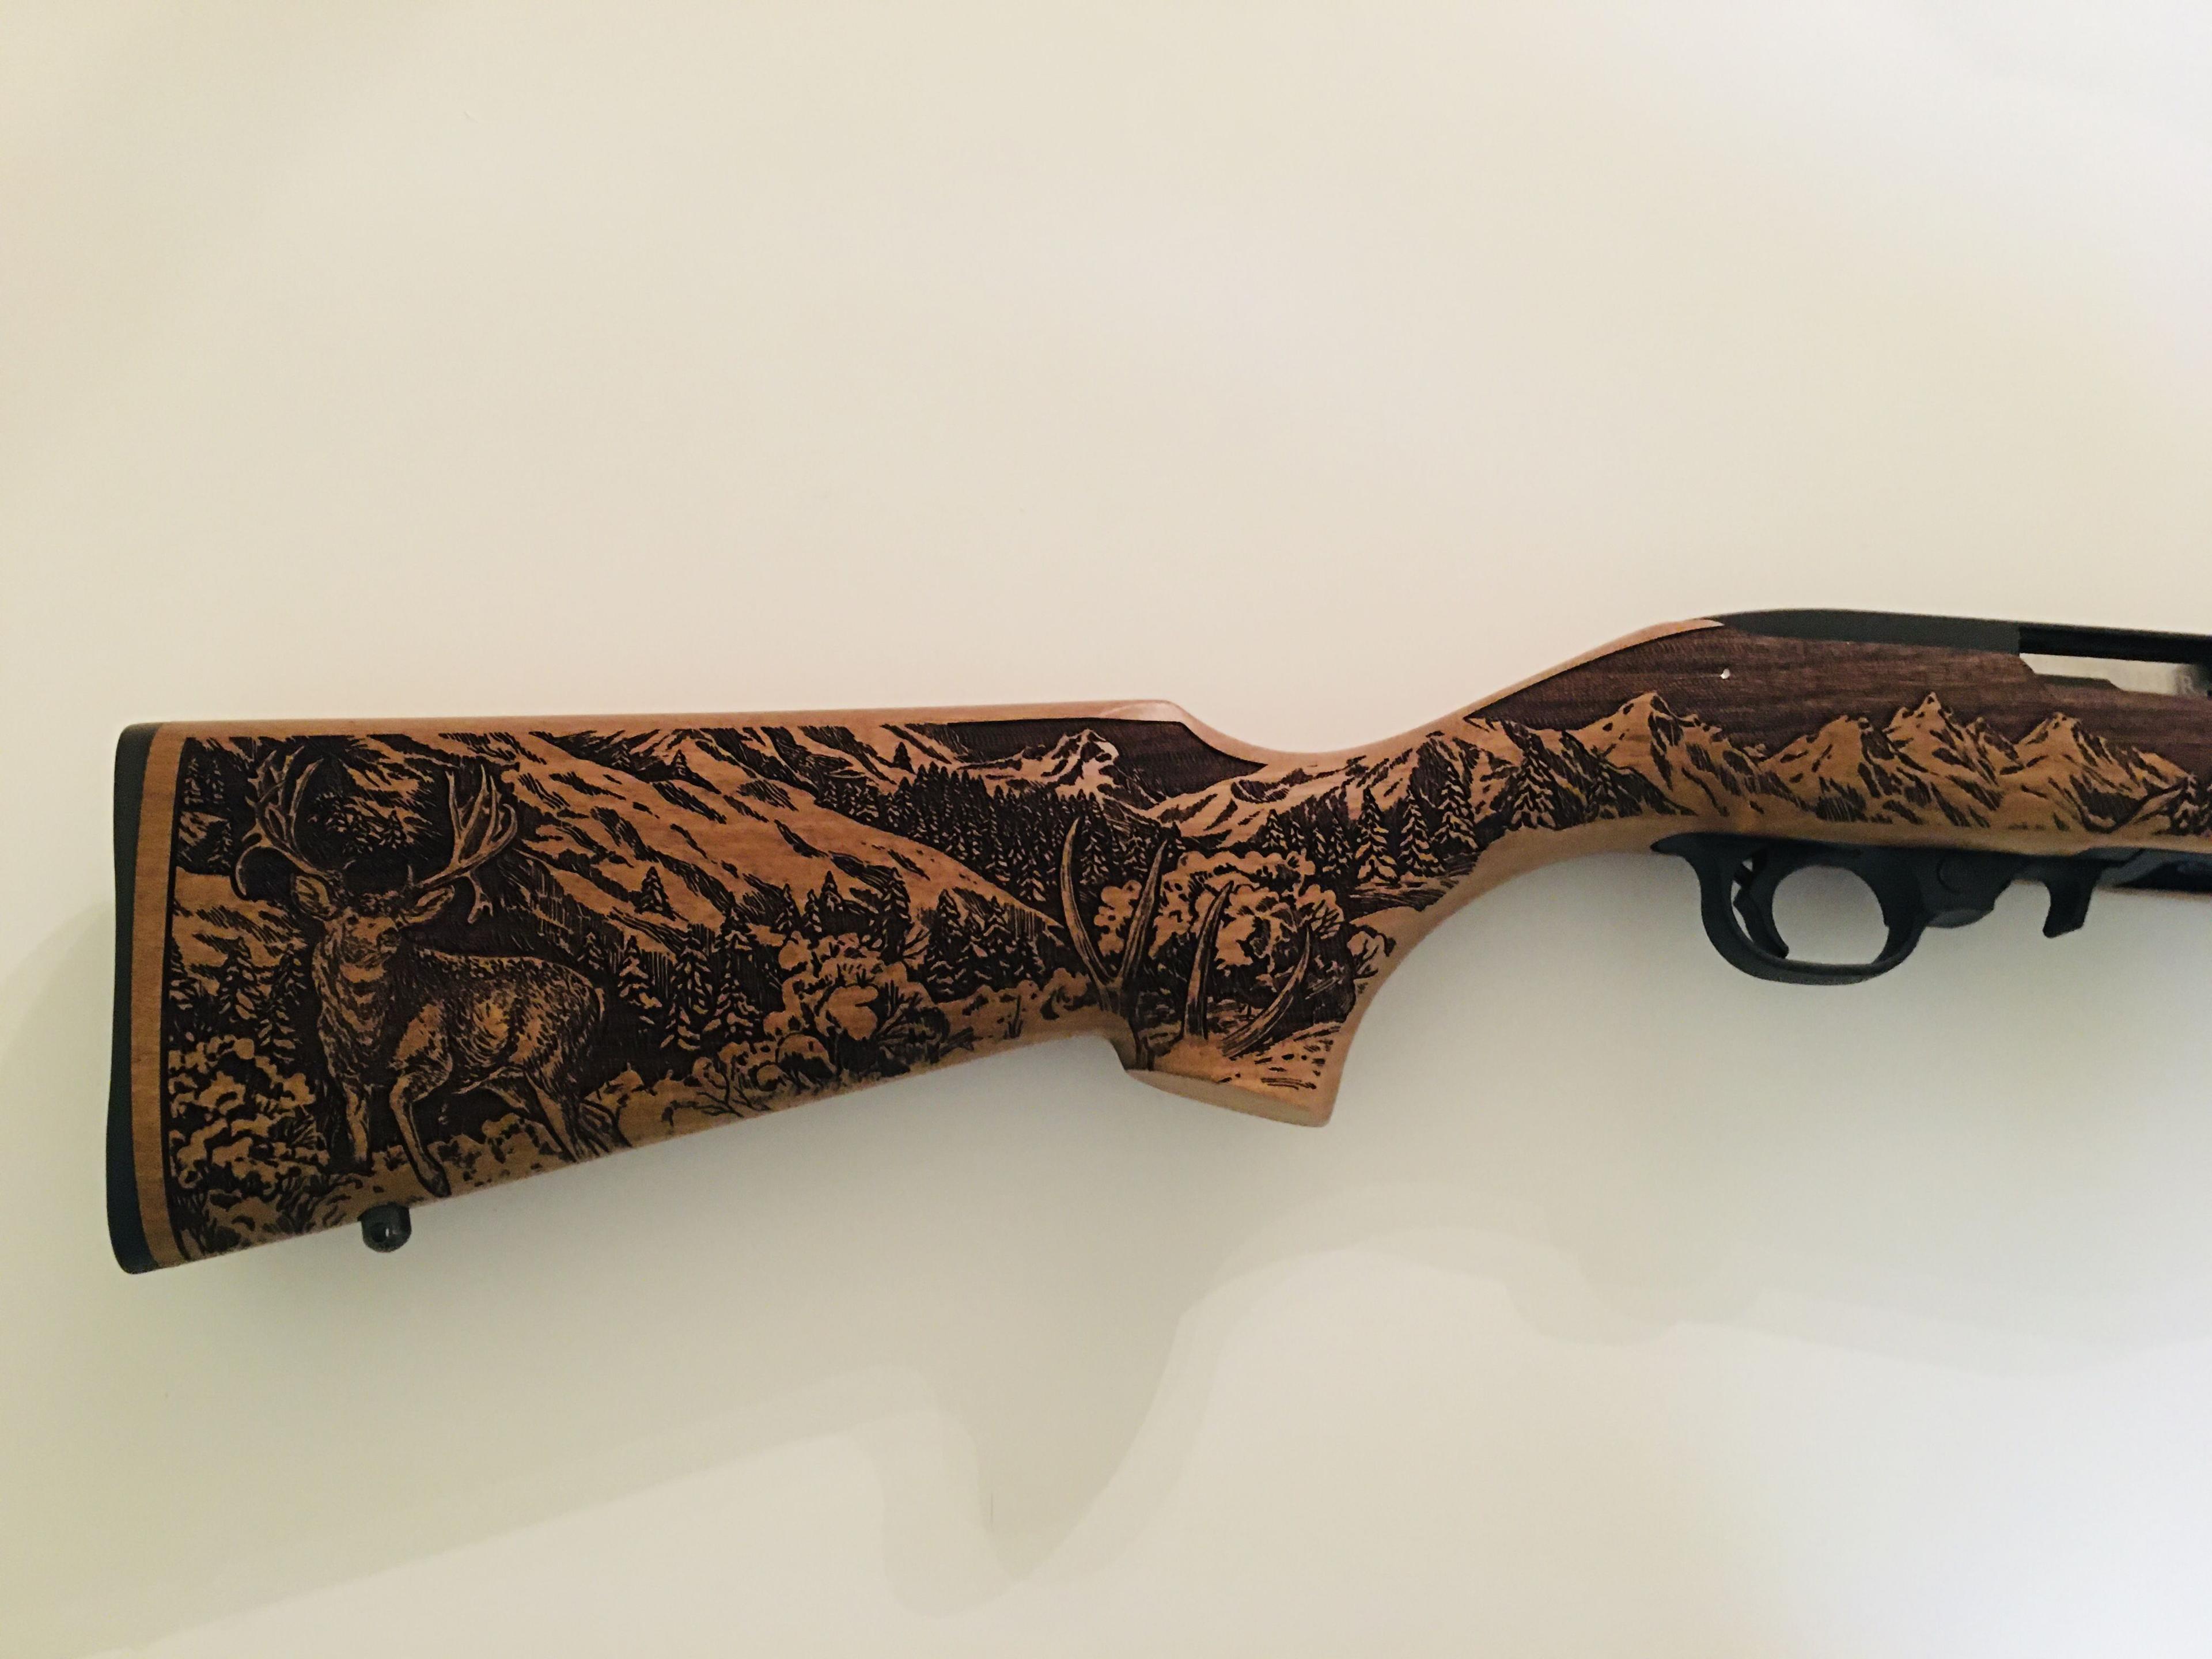 New Ruger 10/22 .22LR Rifle w/Walnut Stock Engraved